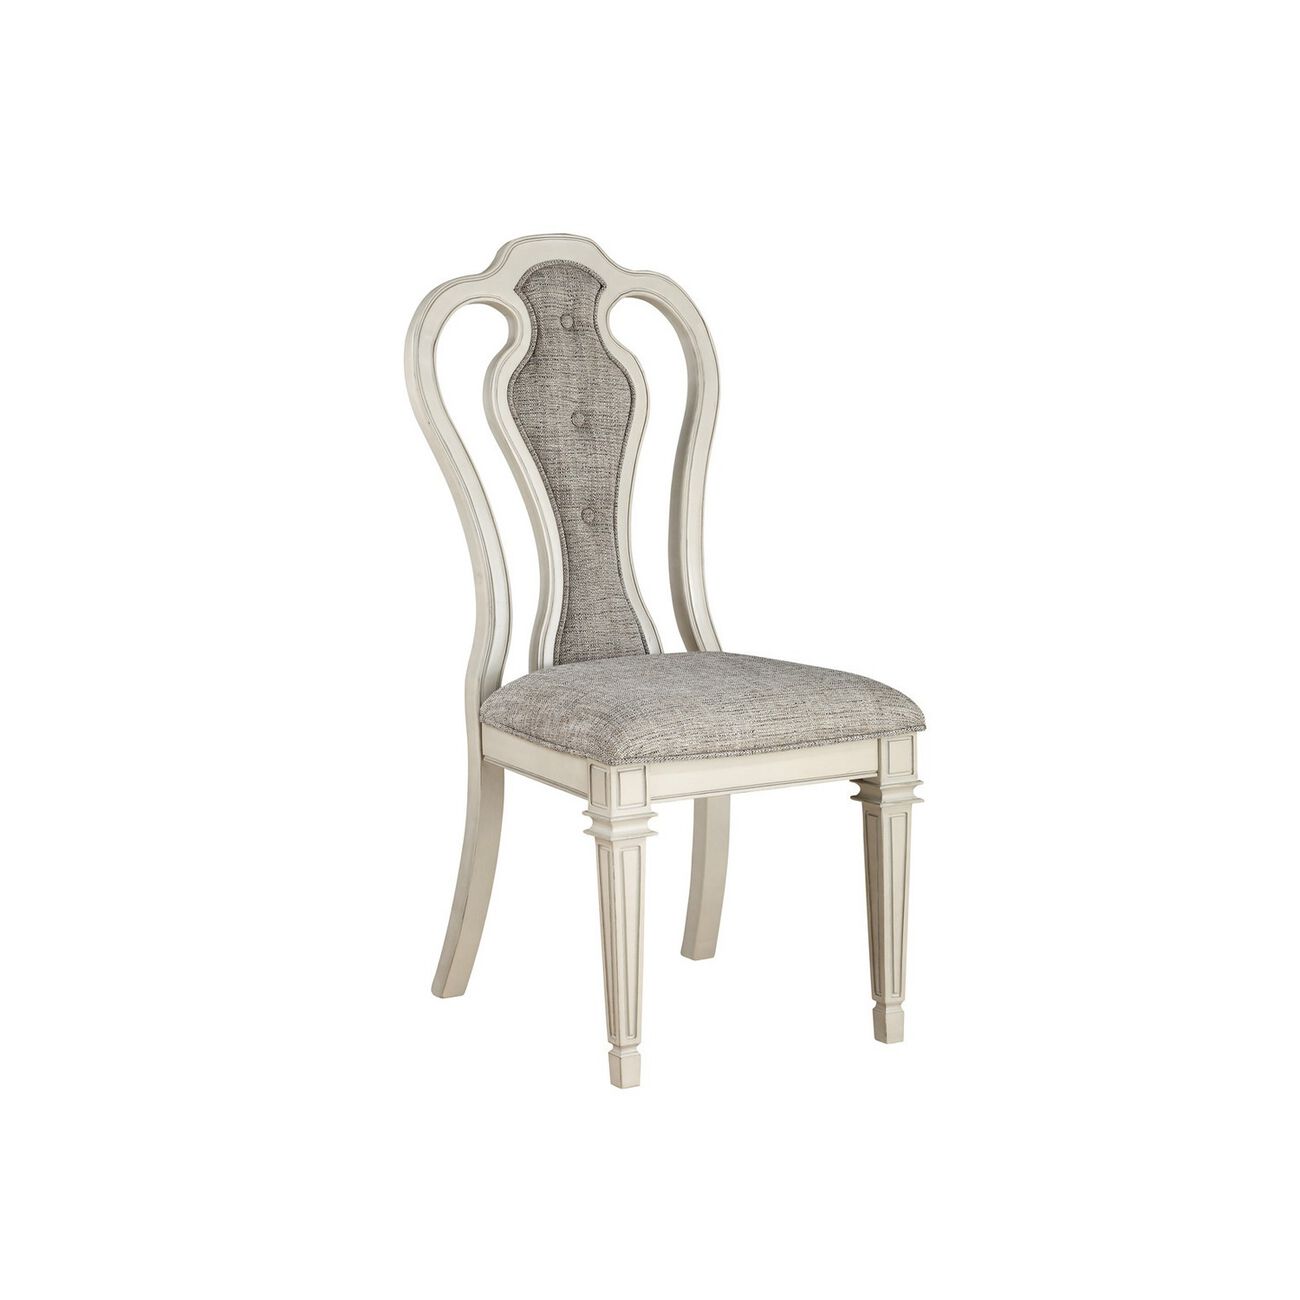 Wood and Fabric Dining Chairs with Curved Back, Set of 2, White and Gray